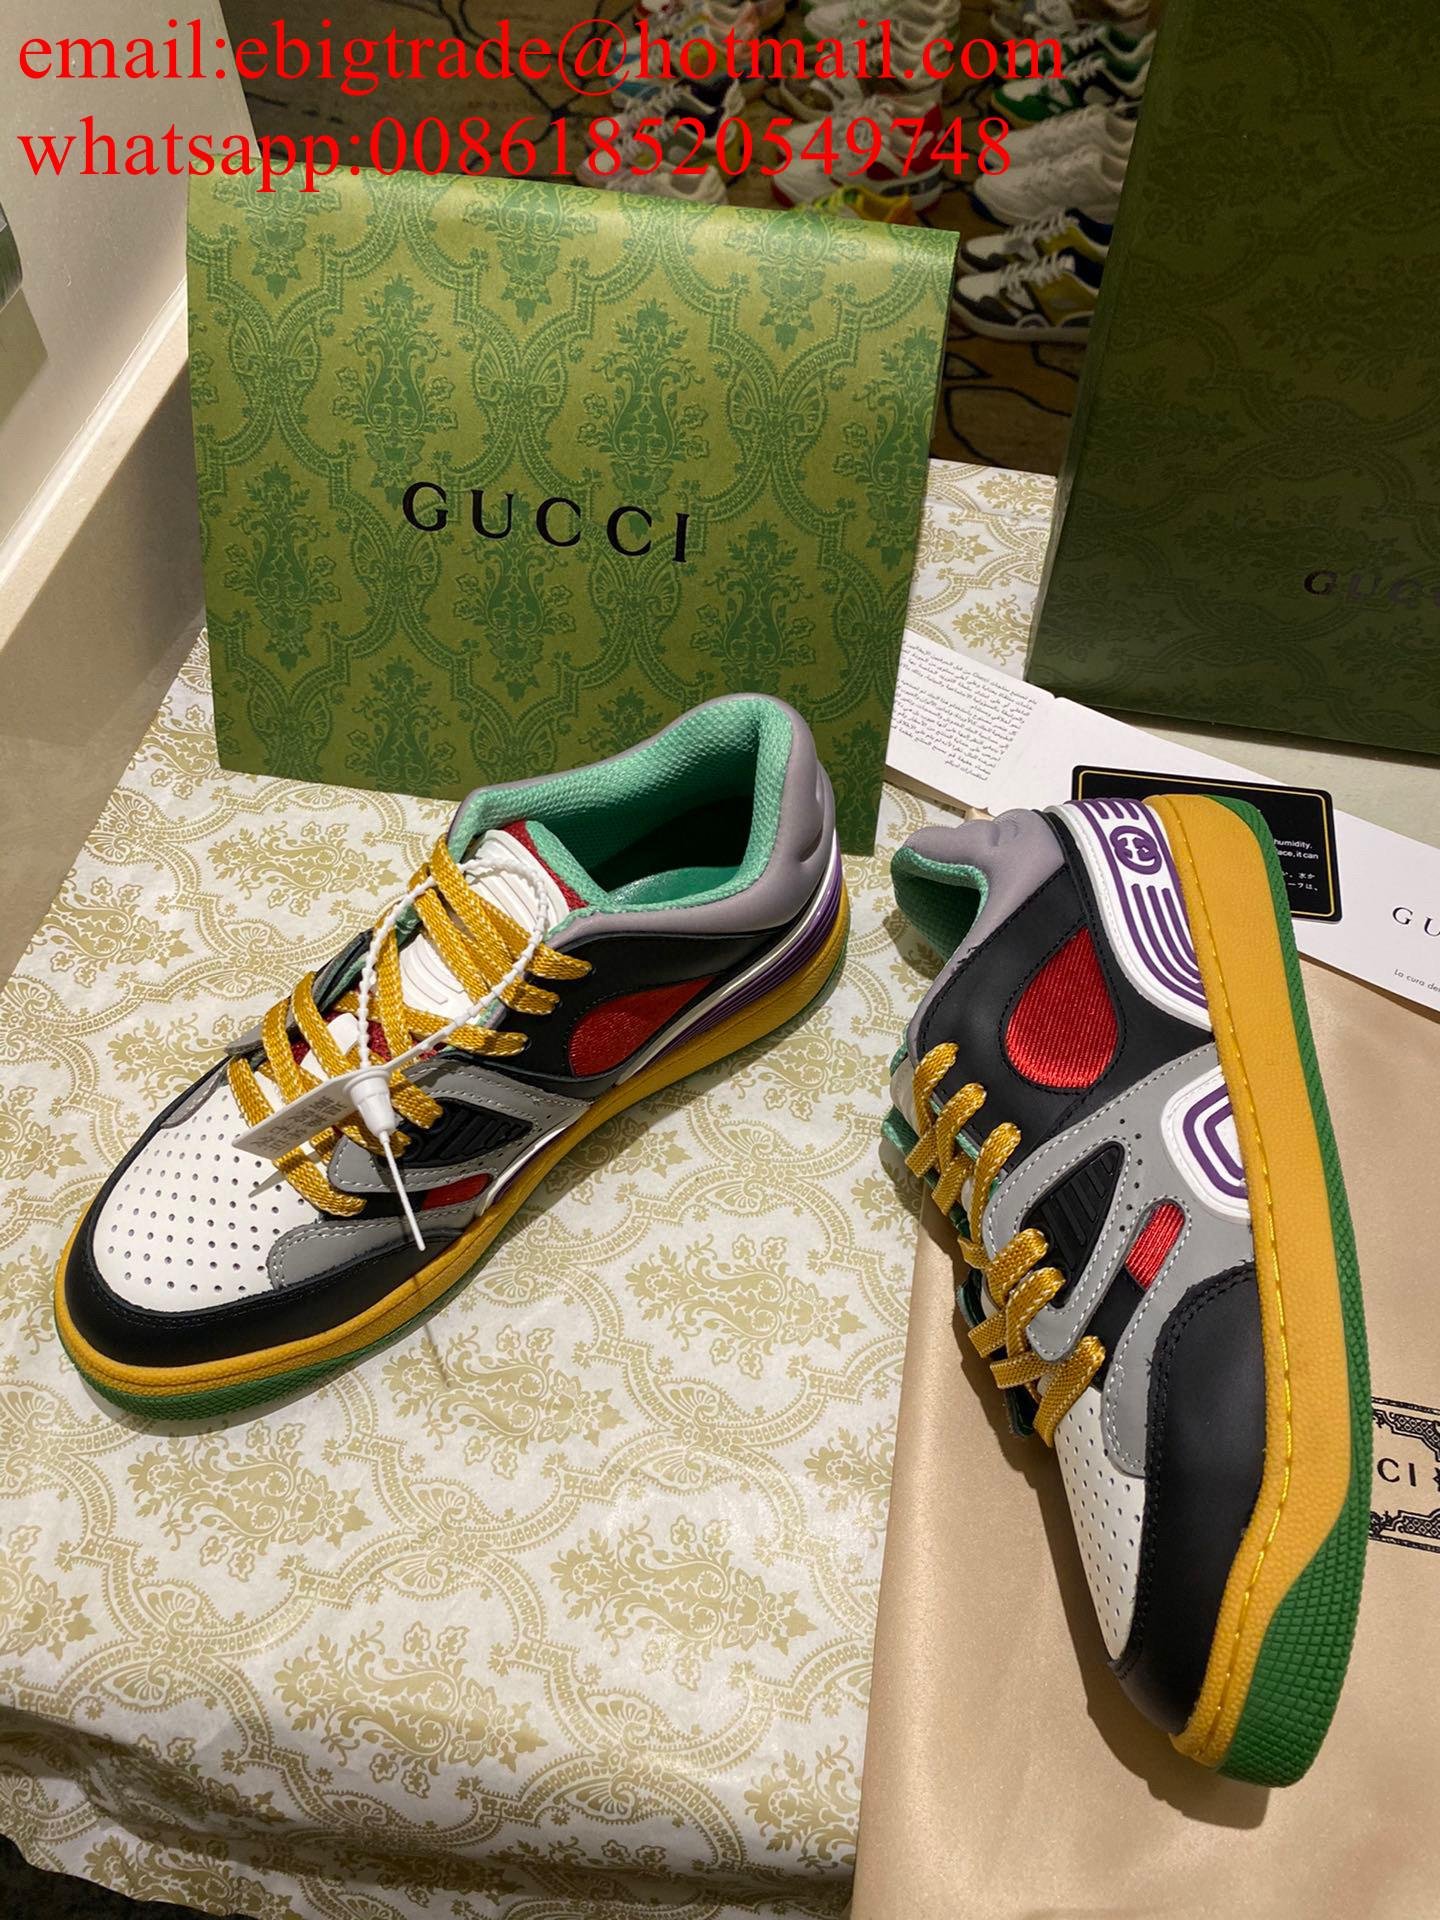 Gucci Basket Sneakers on sale